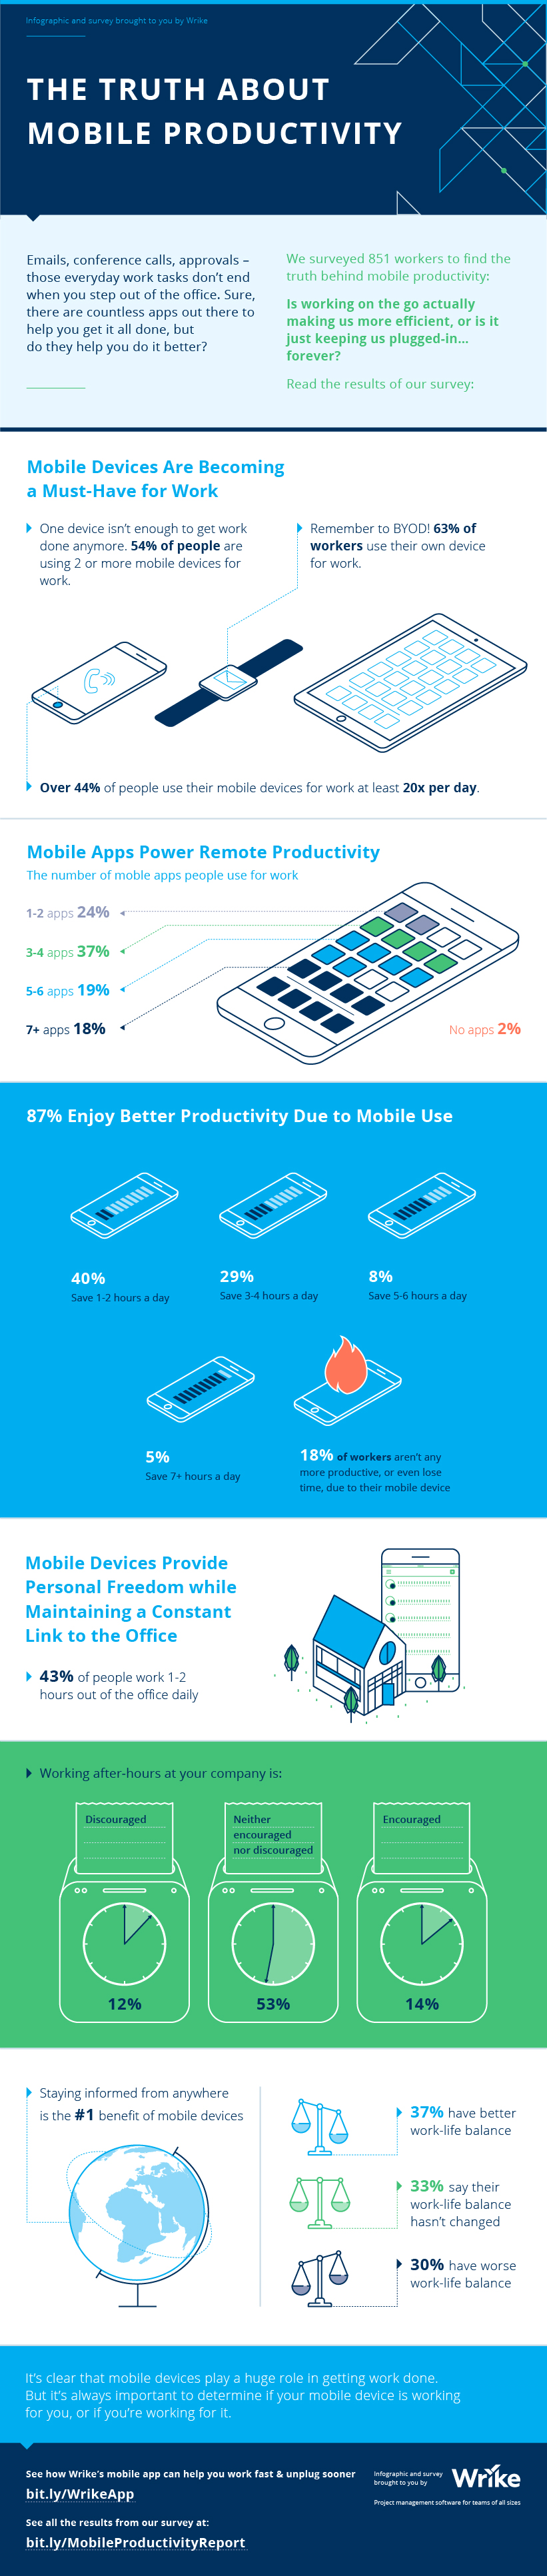 The Truth About Mobile Productivity (infographic)